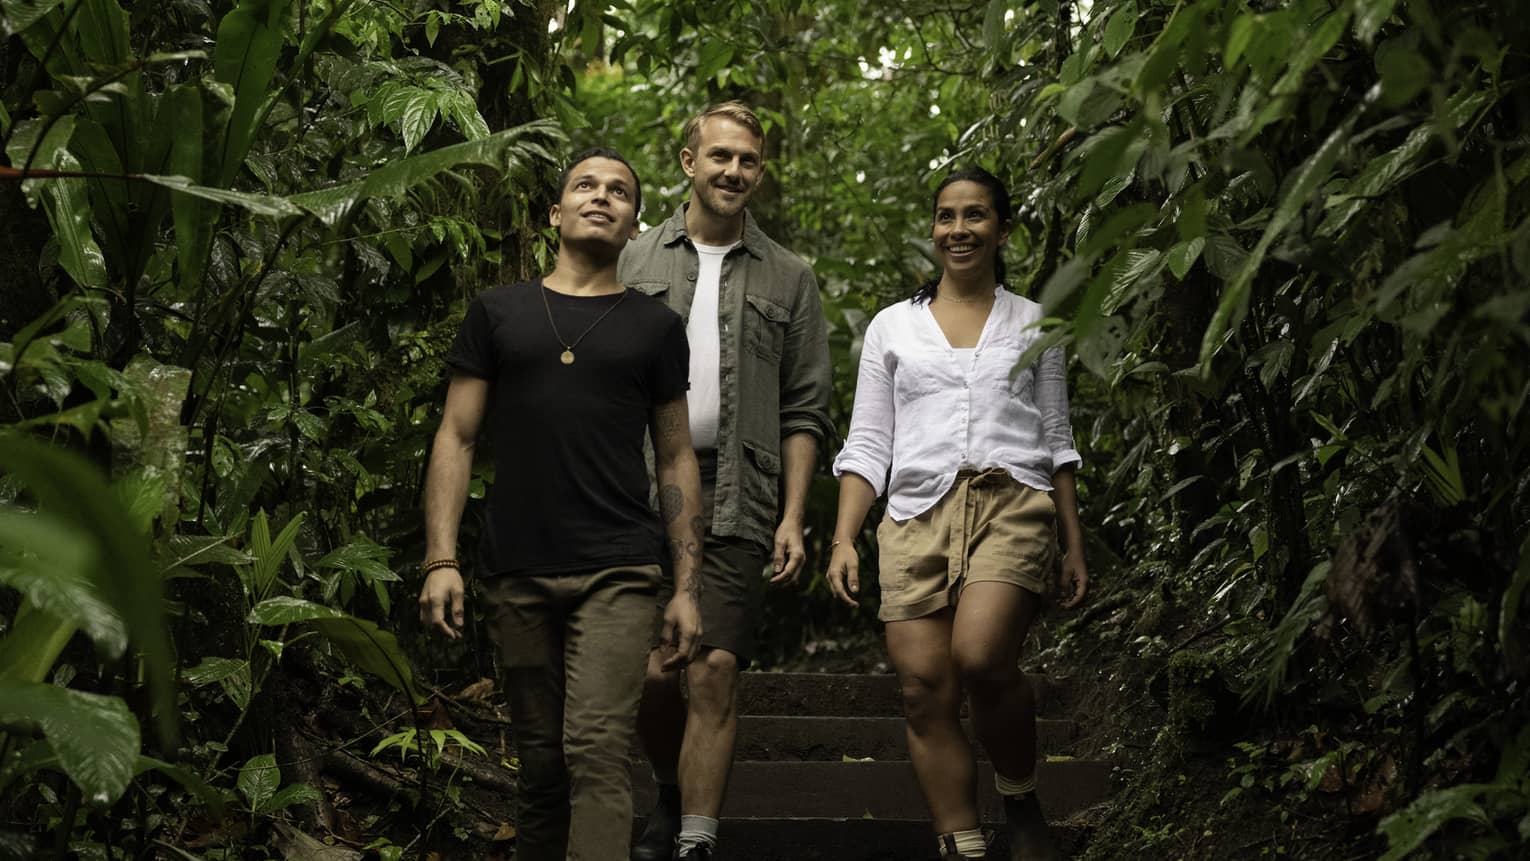 Three adventurous hikers smile as they walk down a wooden staircase surrounded by the lush green foliage of a rainforest.